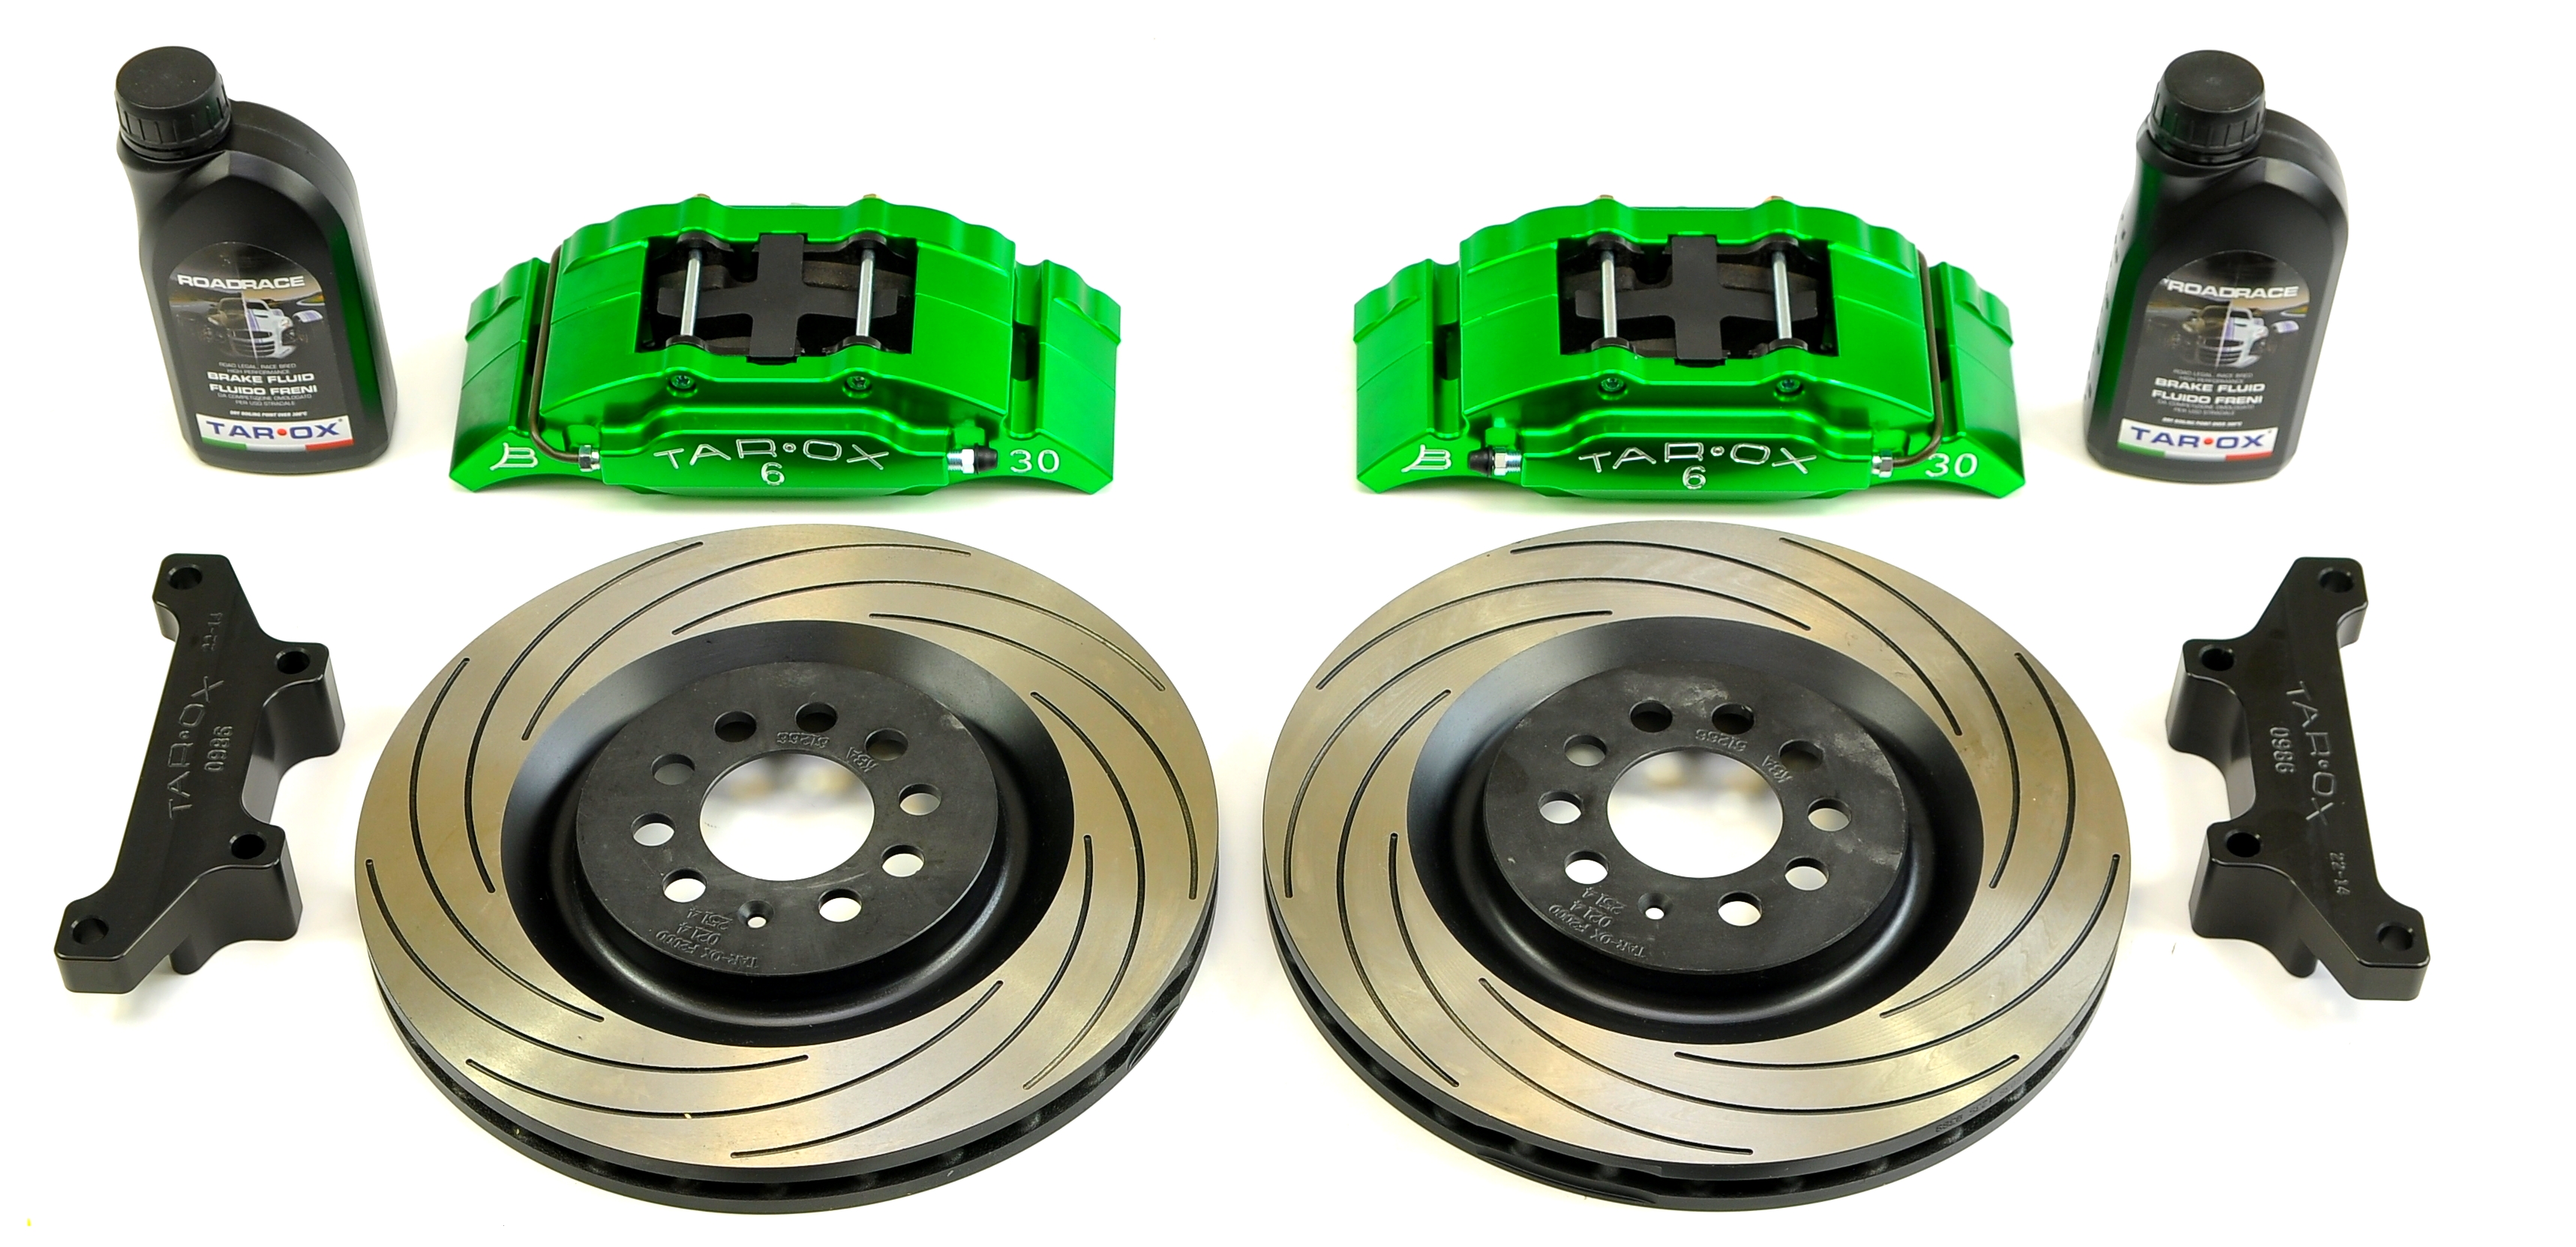 Tarox launches Ford Fiesta St 180 front brake conversion kit